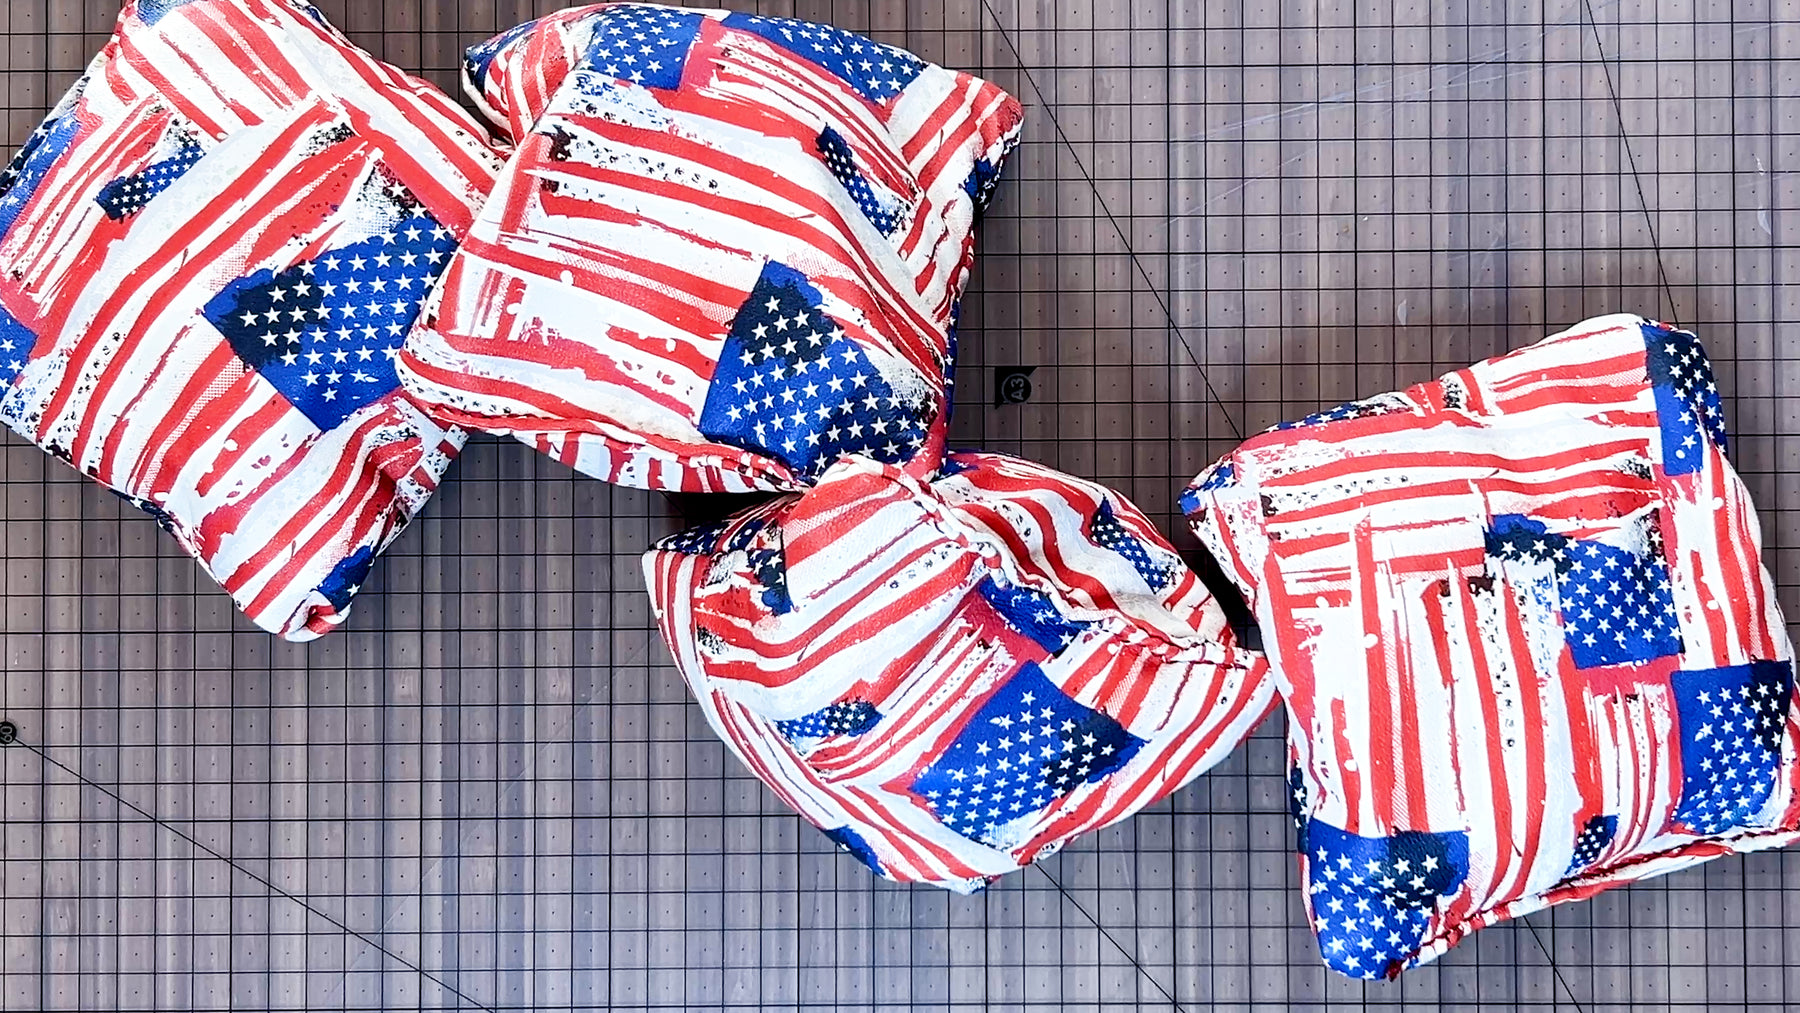 Summertime DIY: Crafting Durable Leather Cornhole Bags in No Time